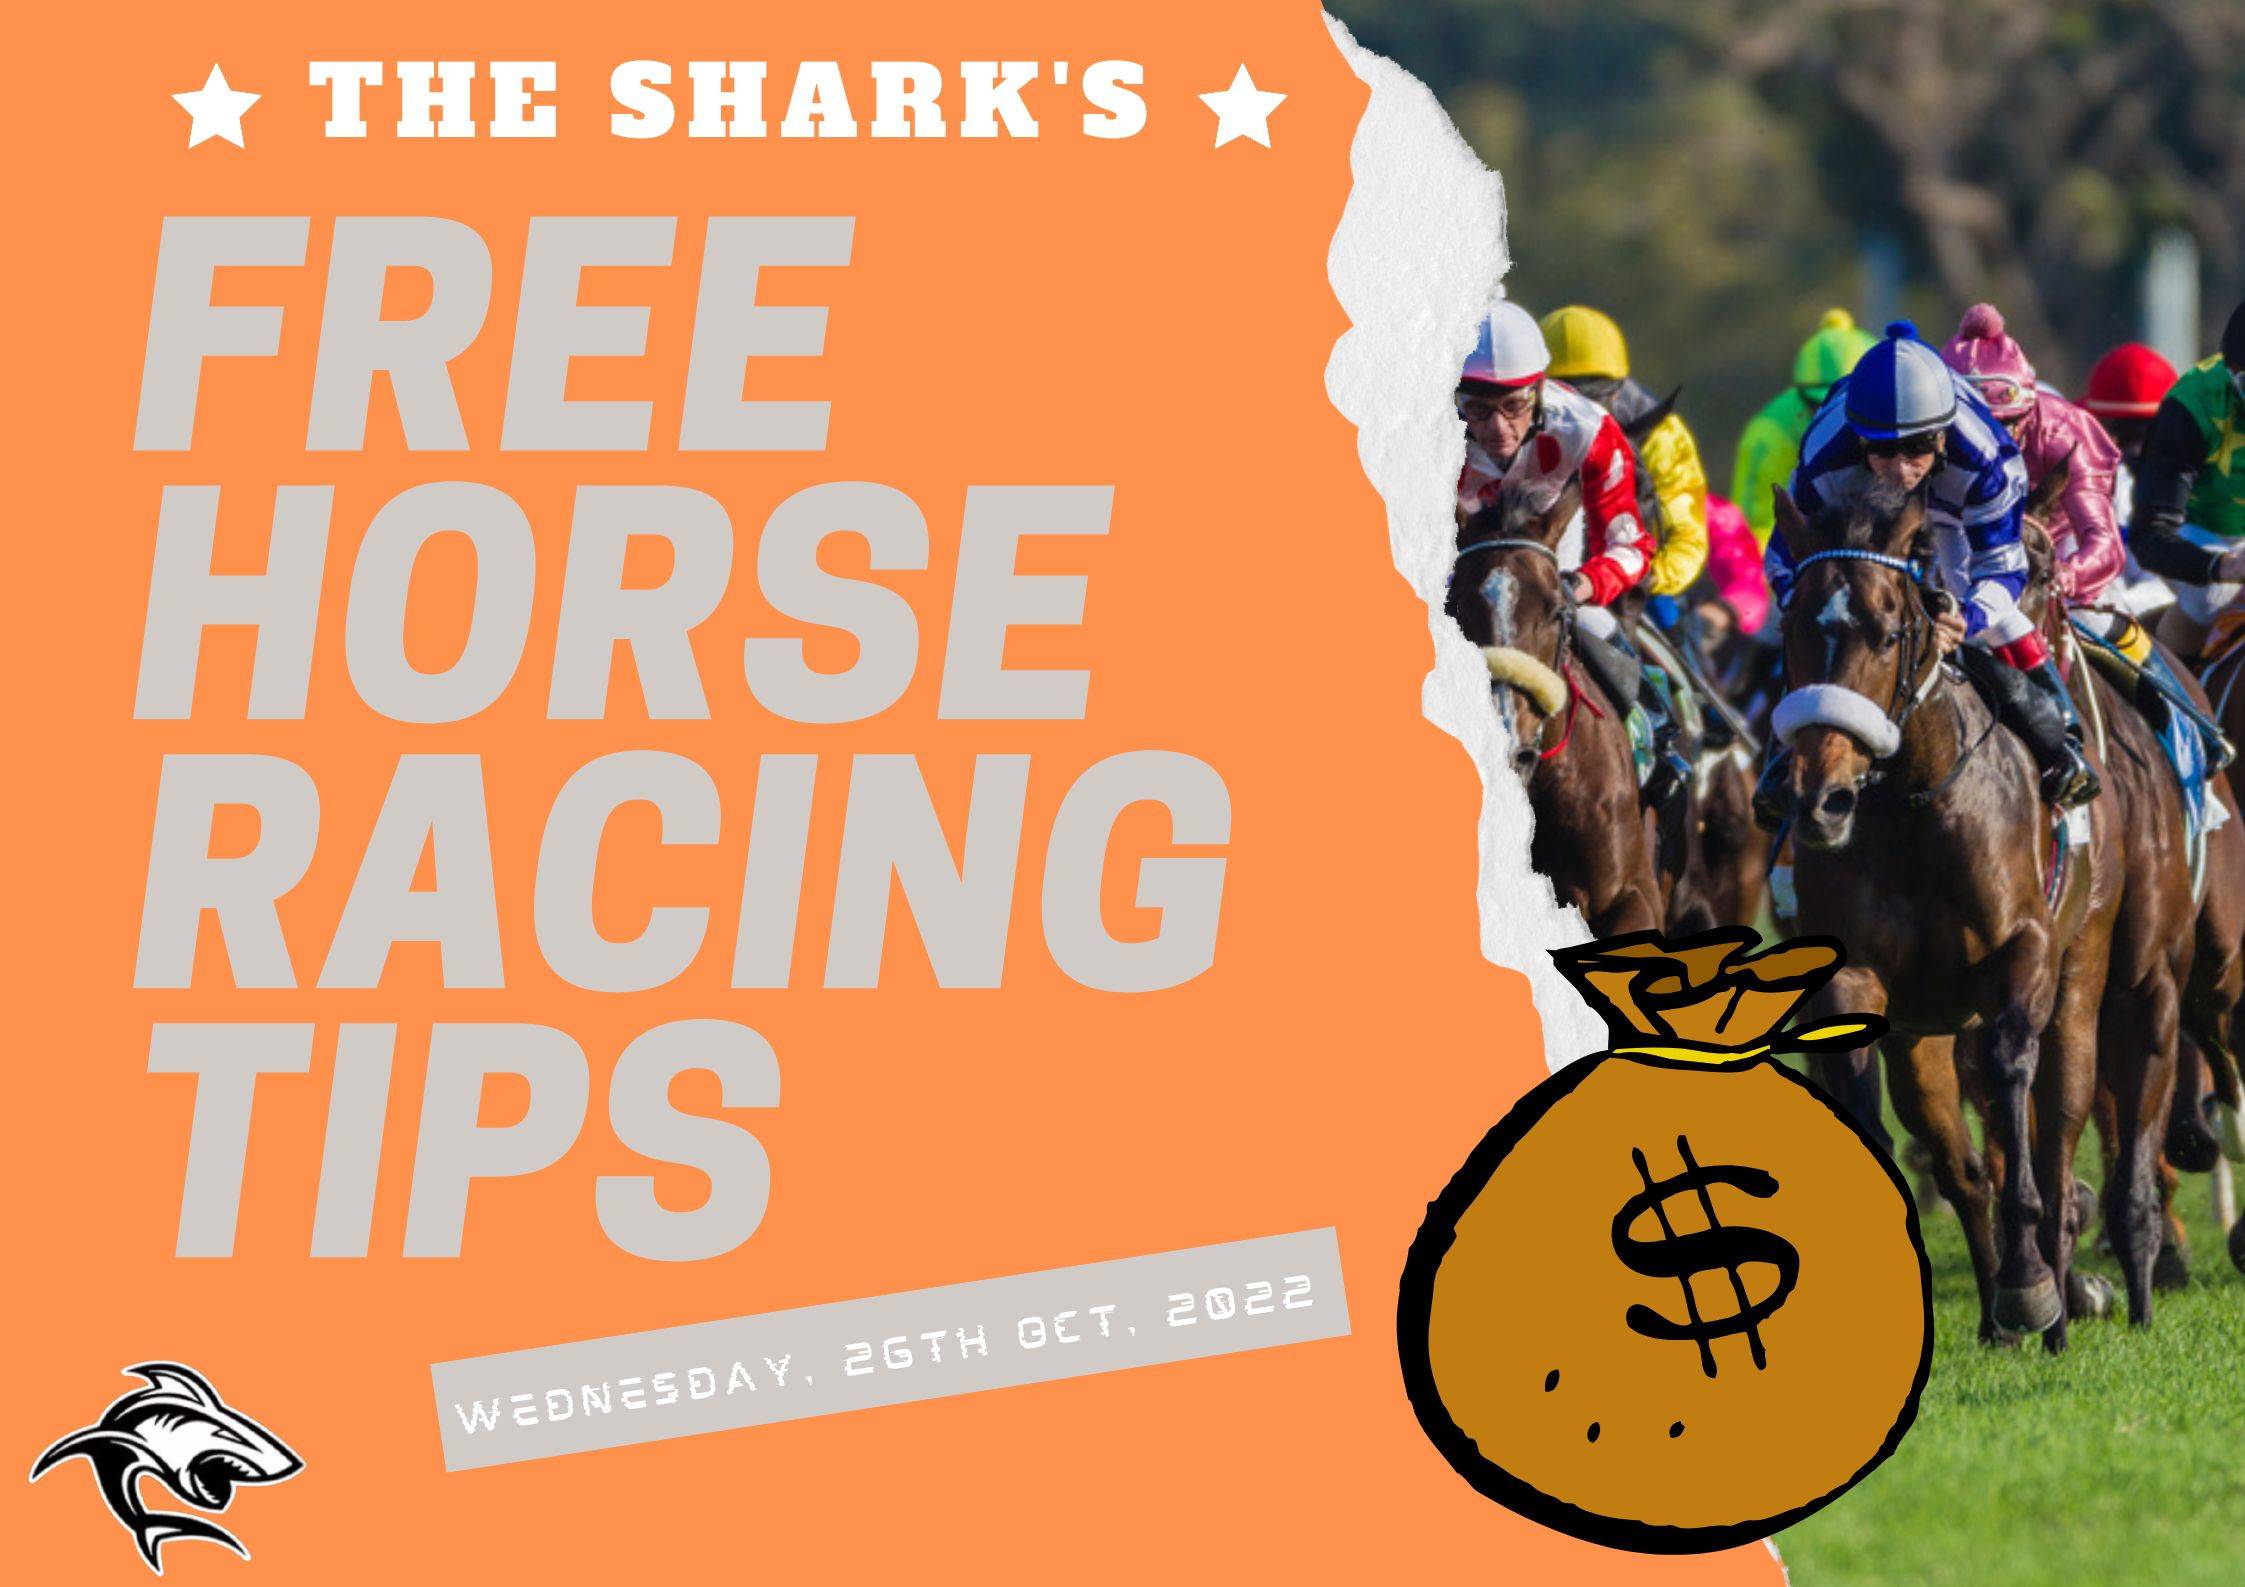 Free Horse Racing Tips - 26th Oct